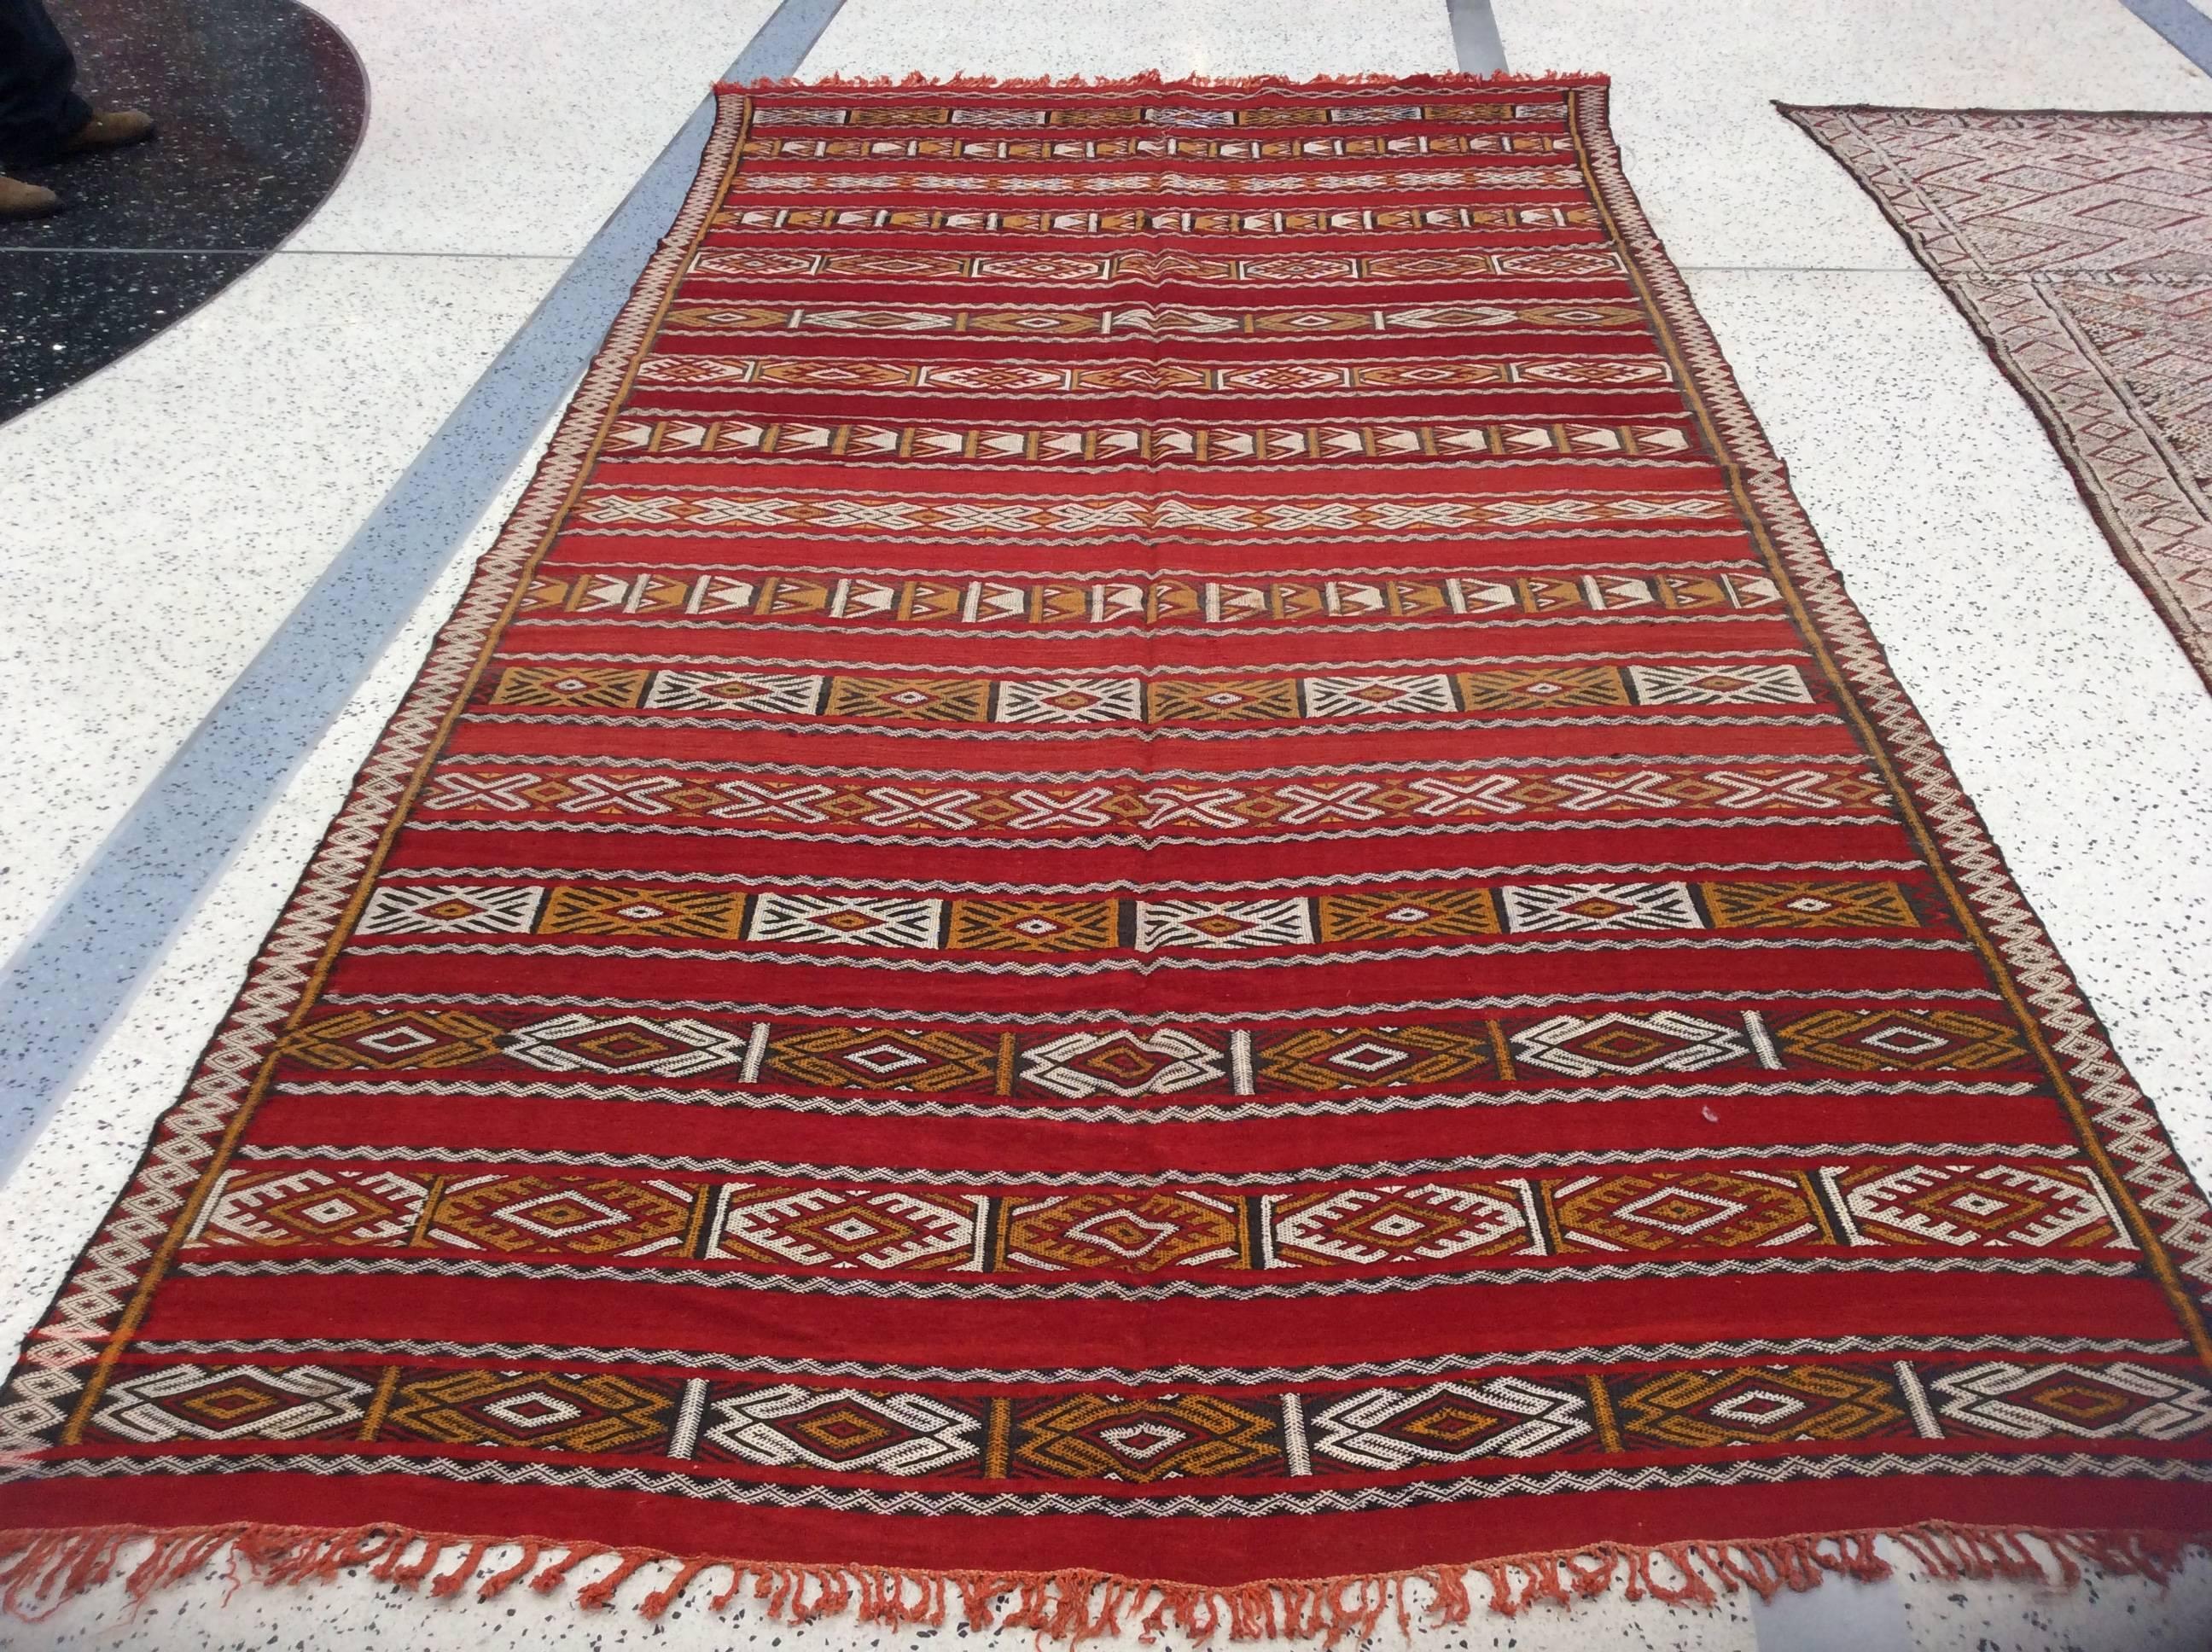 Tribal design Moroccan runner

A weaving technique that has been passed down from generations to generations makes Moroccan Berber rug such a fine addition to your collection. It is made of luxurious hand-spun wool by the high atlas tribe, no two